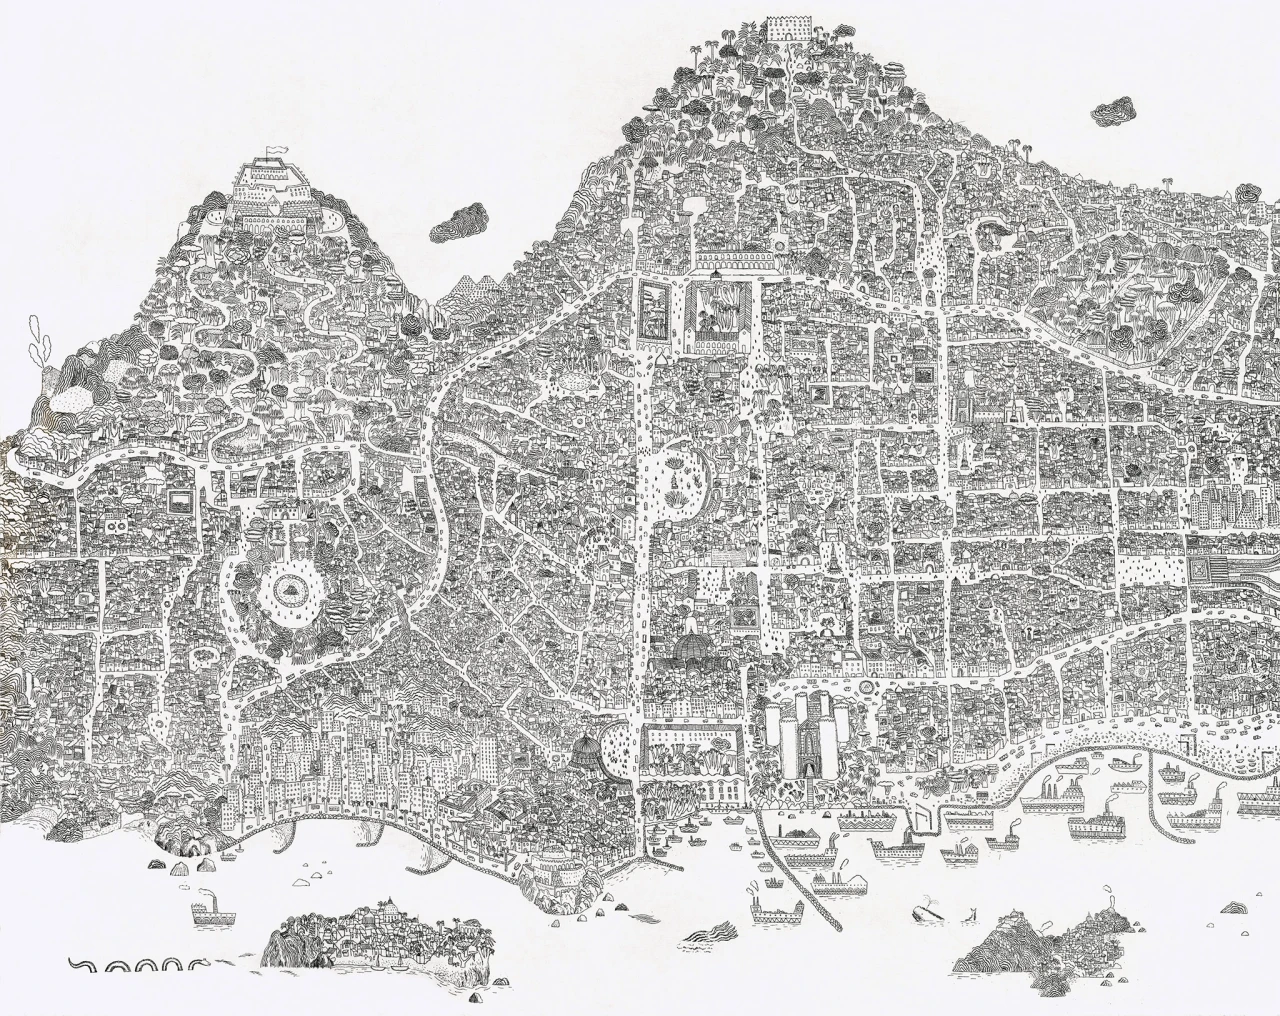 Imaginary Map of Naples